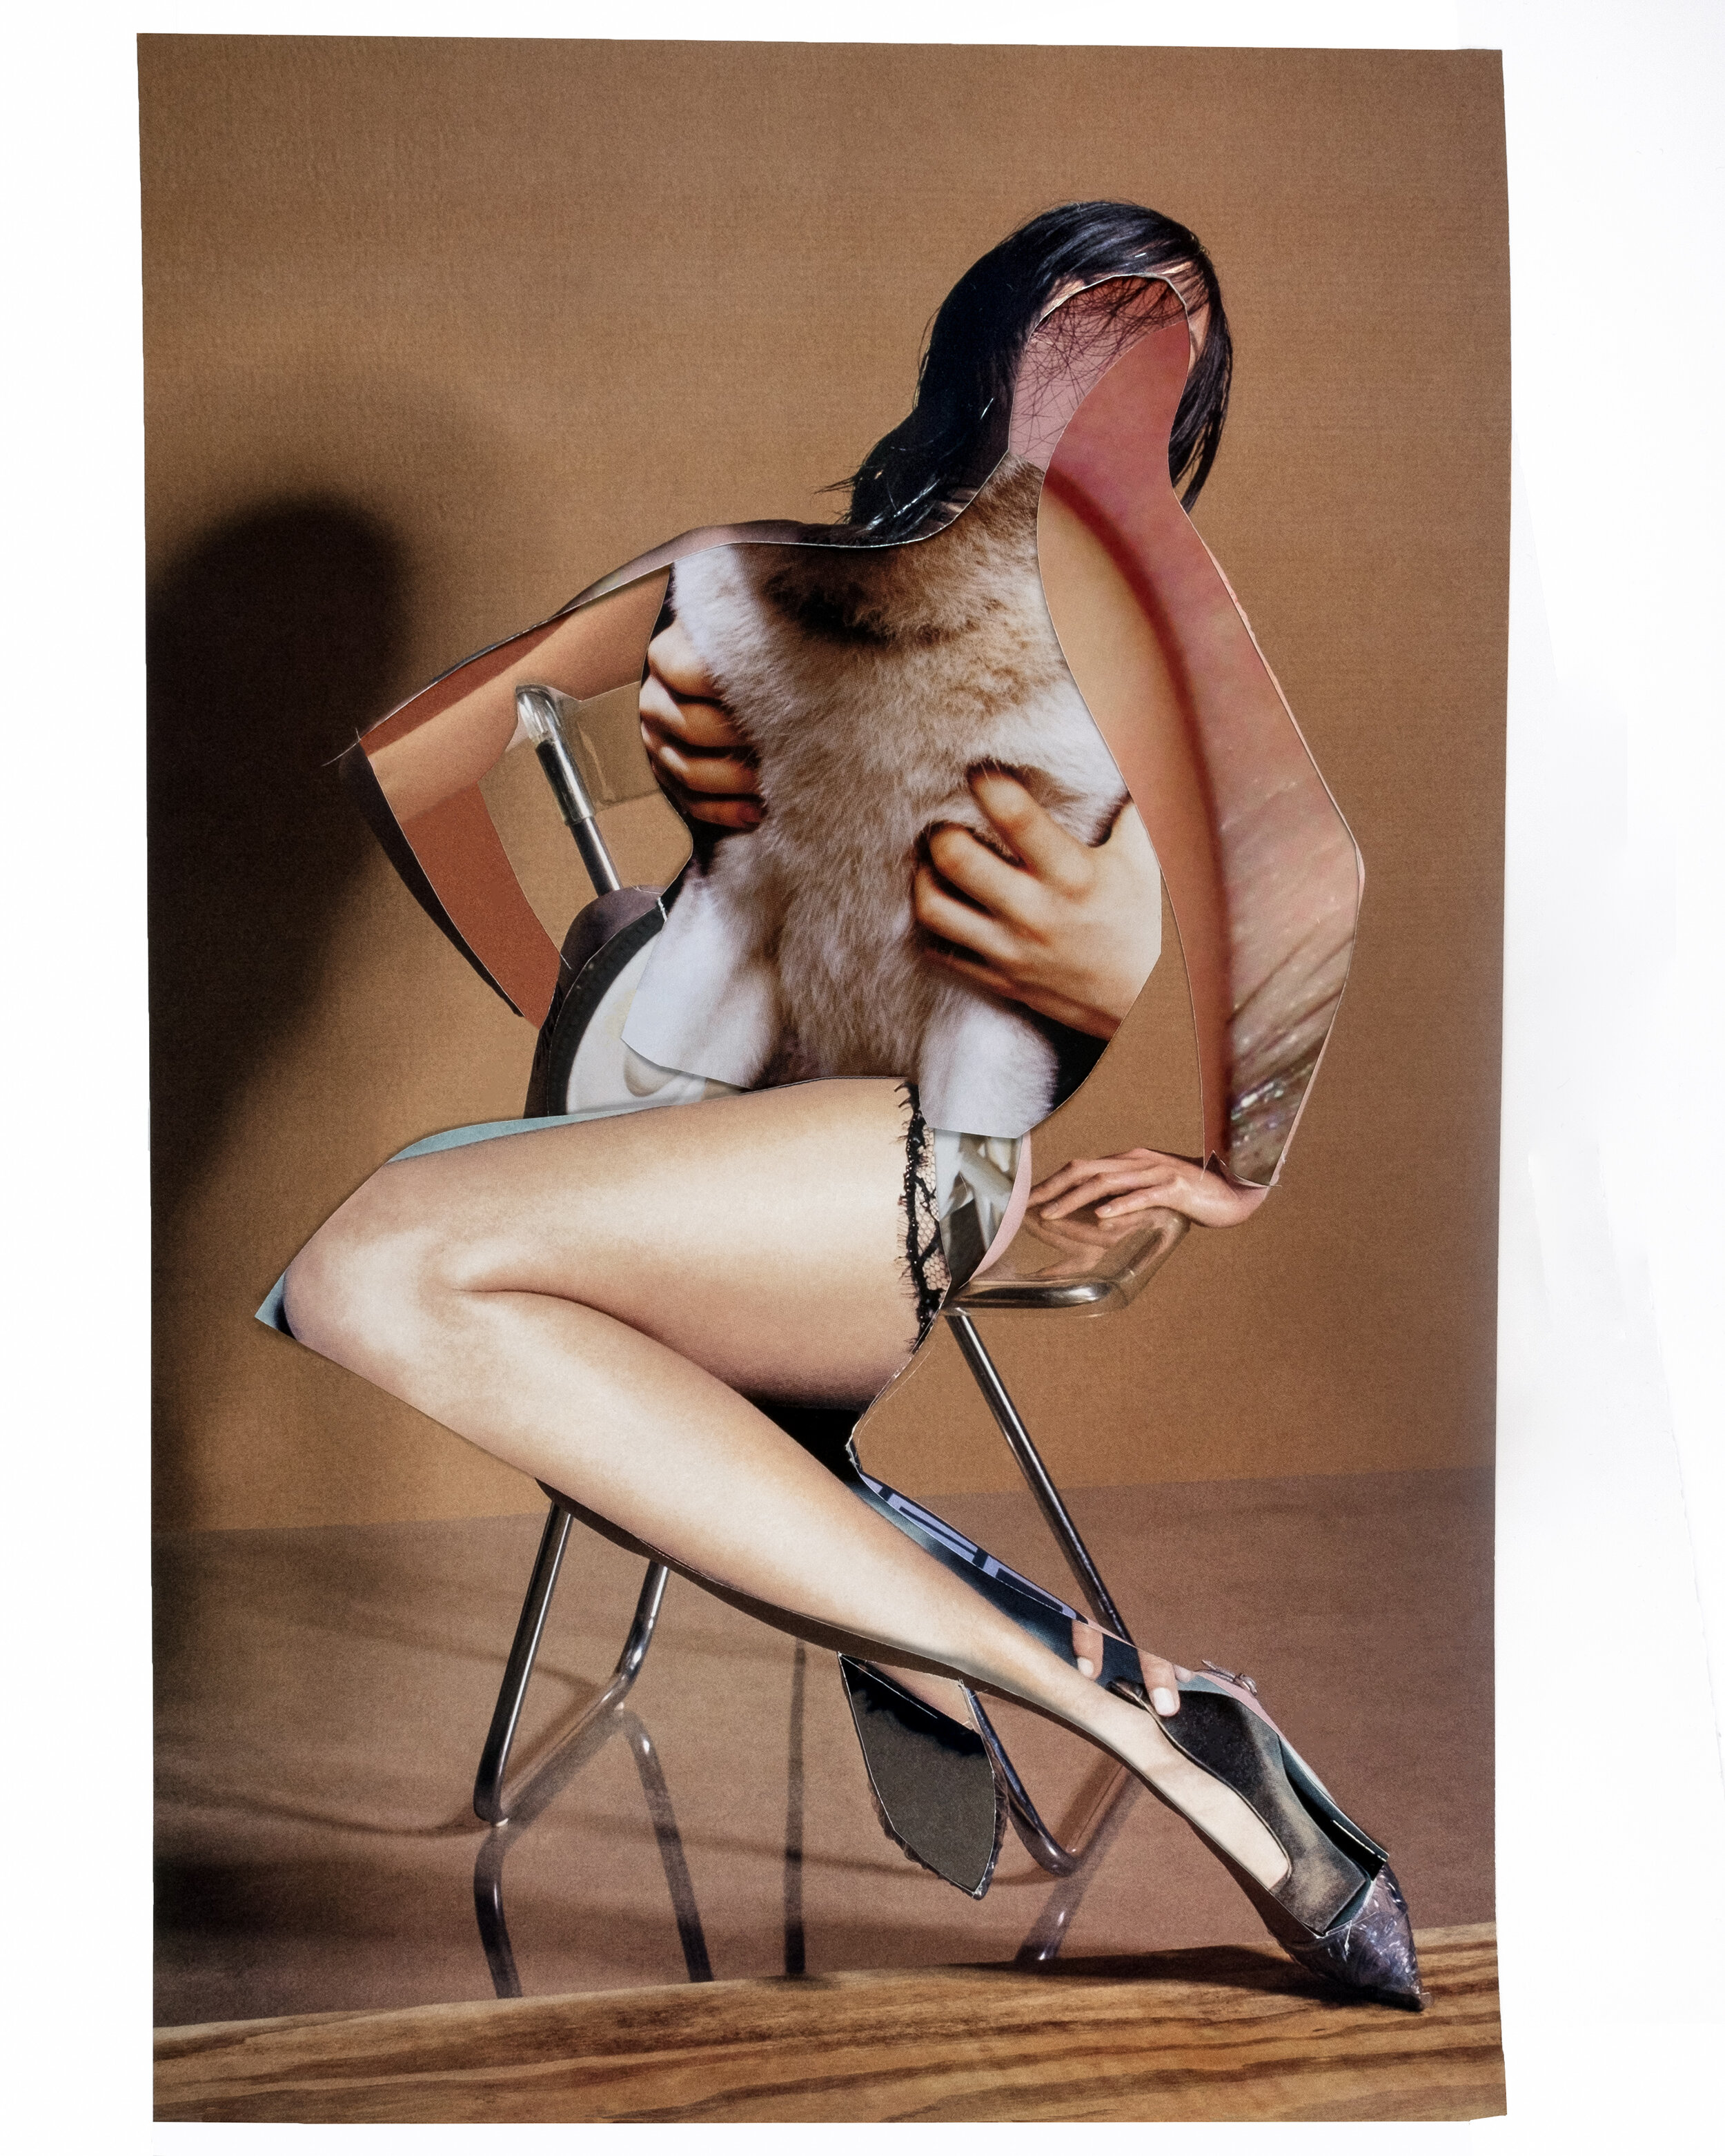 Figure with Fur Torso_24 x 30 cm_UK_2020_K Young Collage.jpg